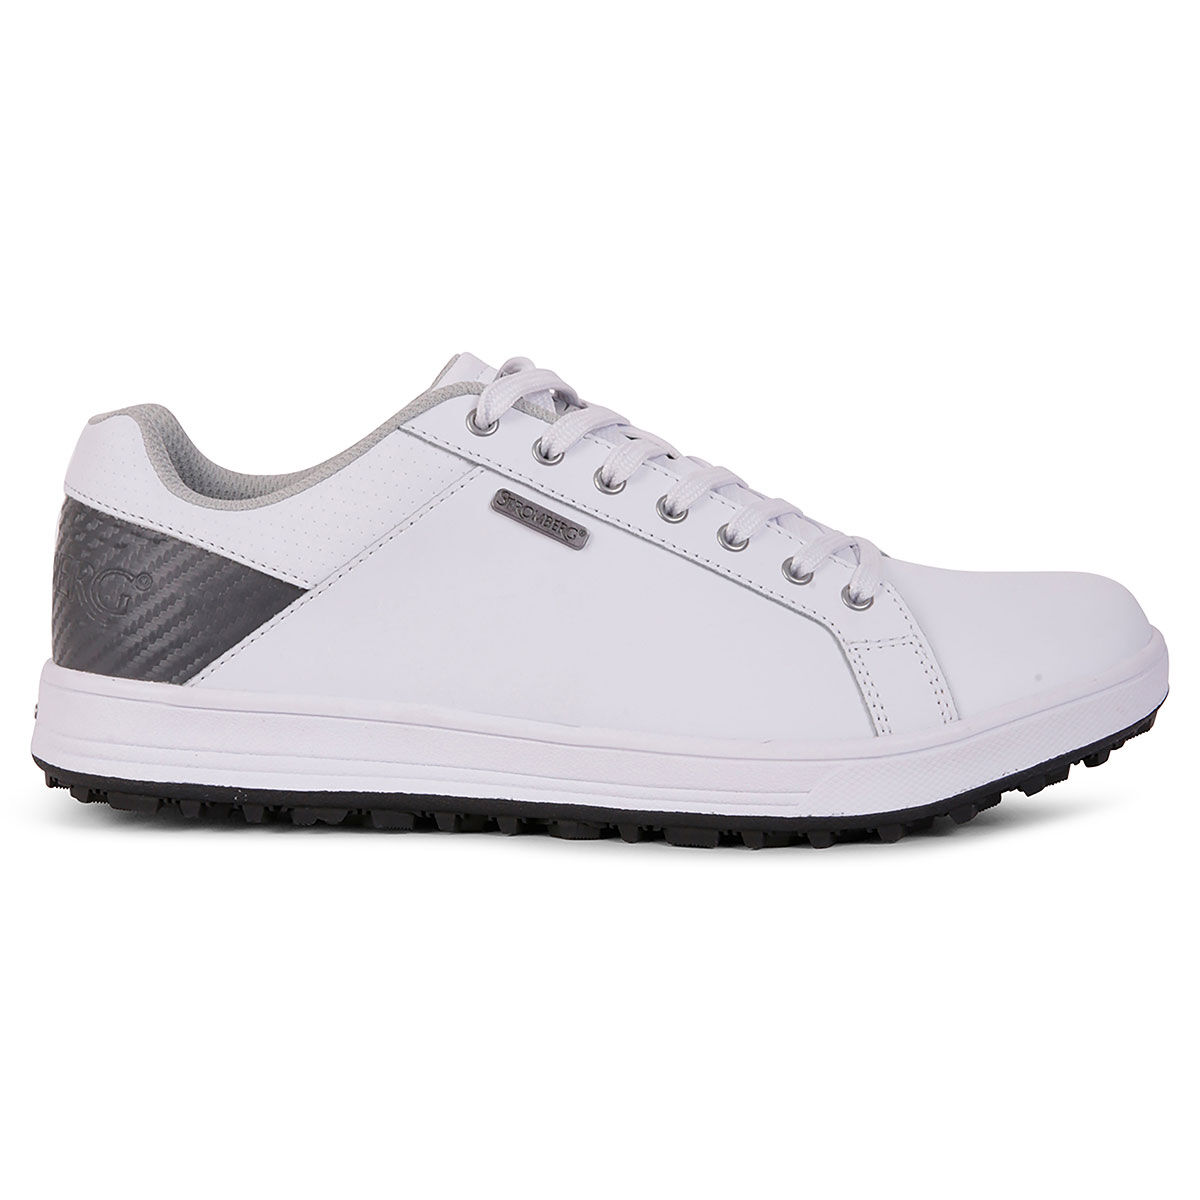 Chaussures Stromberg Street Classic, homme, 7, Blanc/Gris | Online Golf